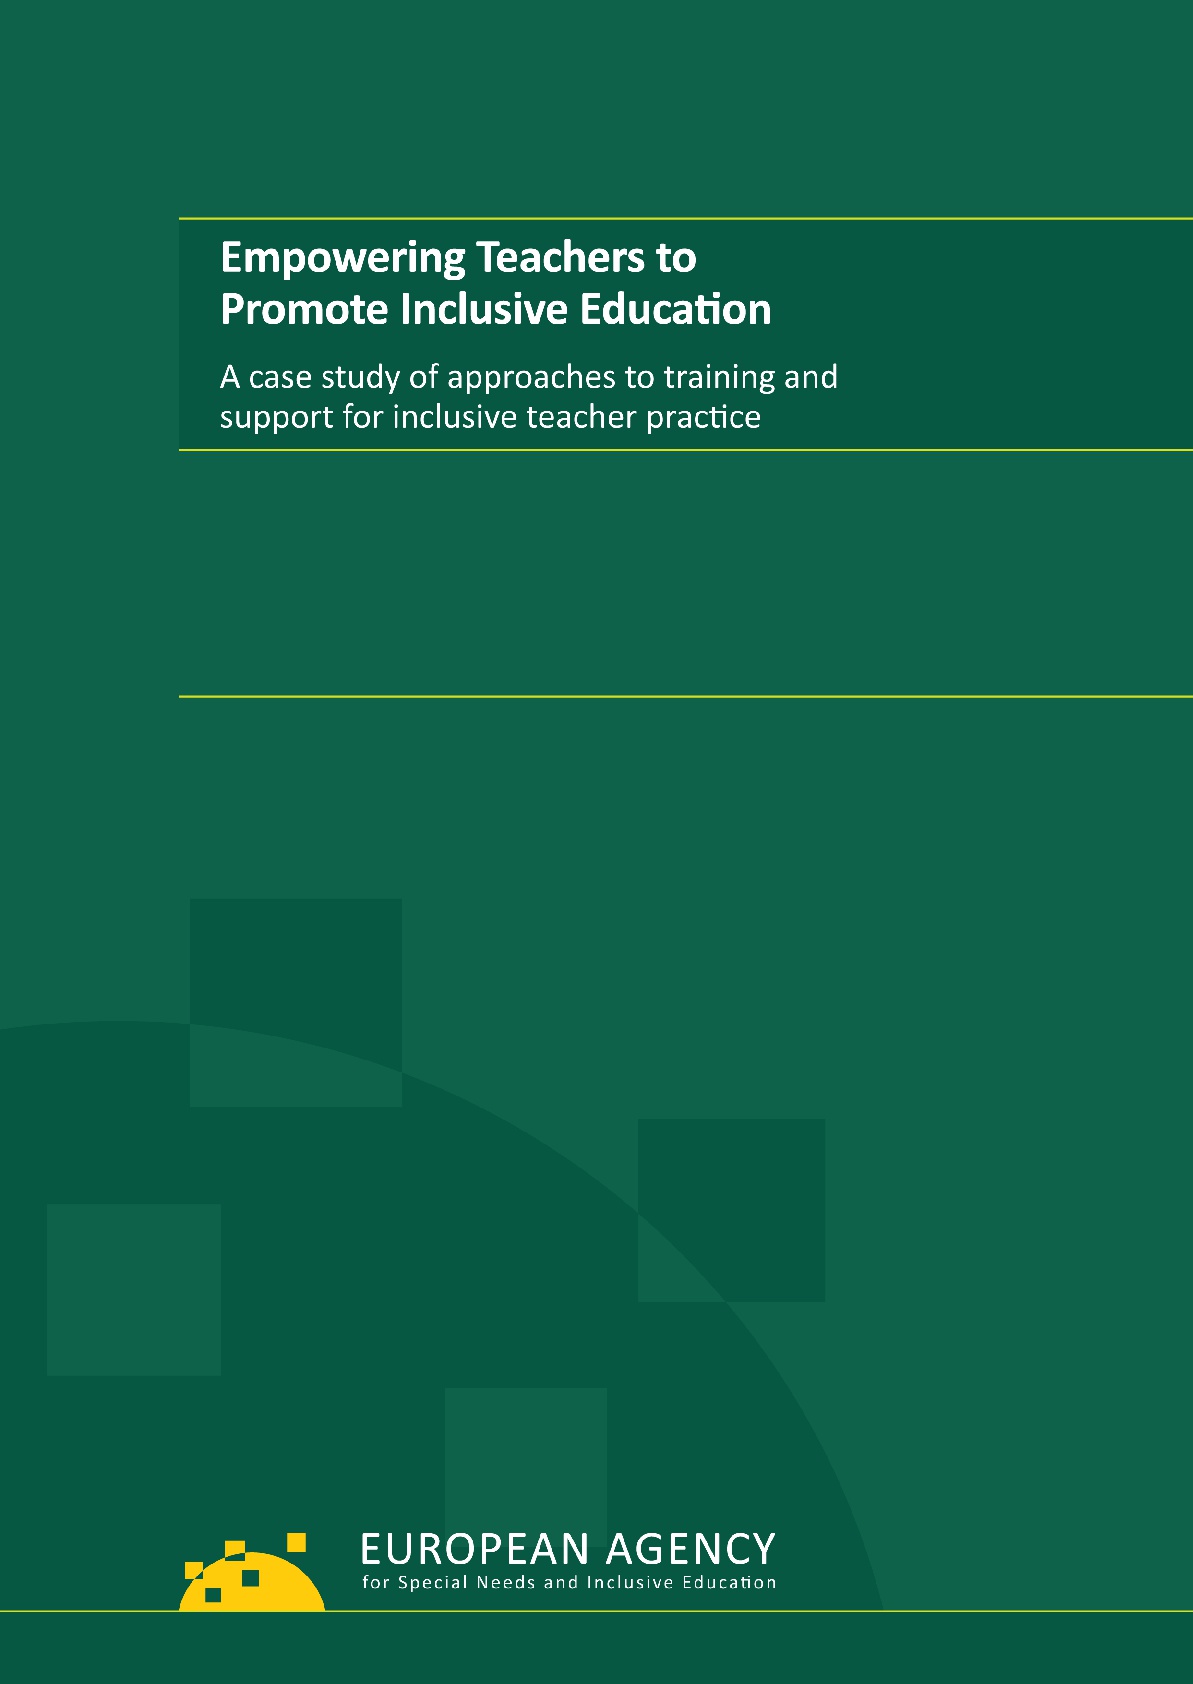 Empowering Teachers to Promote Inclusive Education. A case study of approaches to training and support for inclusive teacher practice.